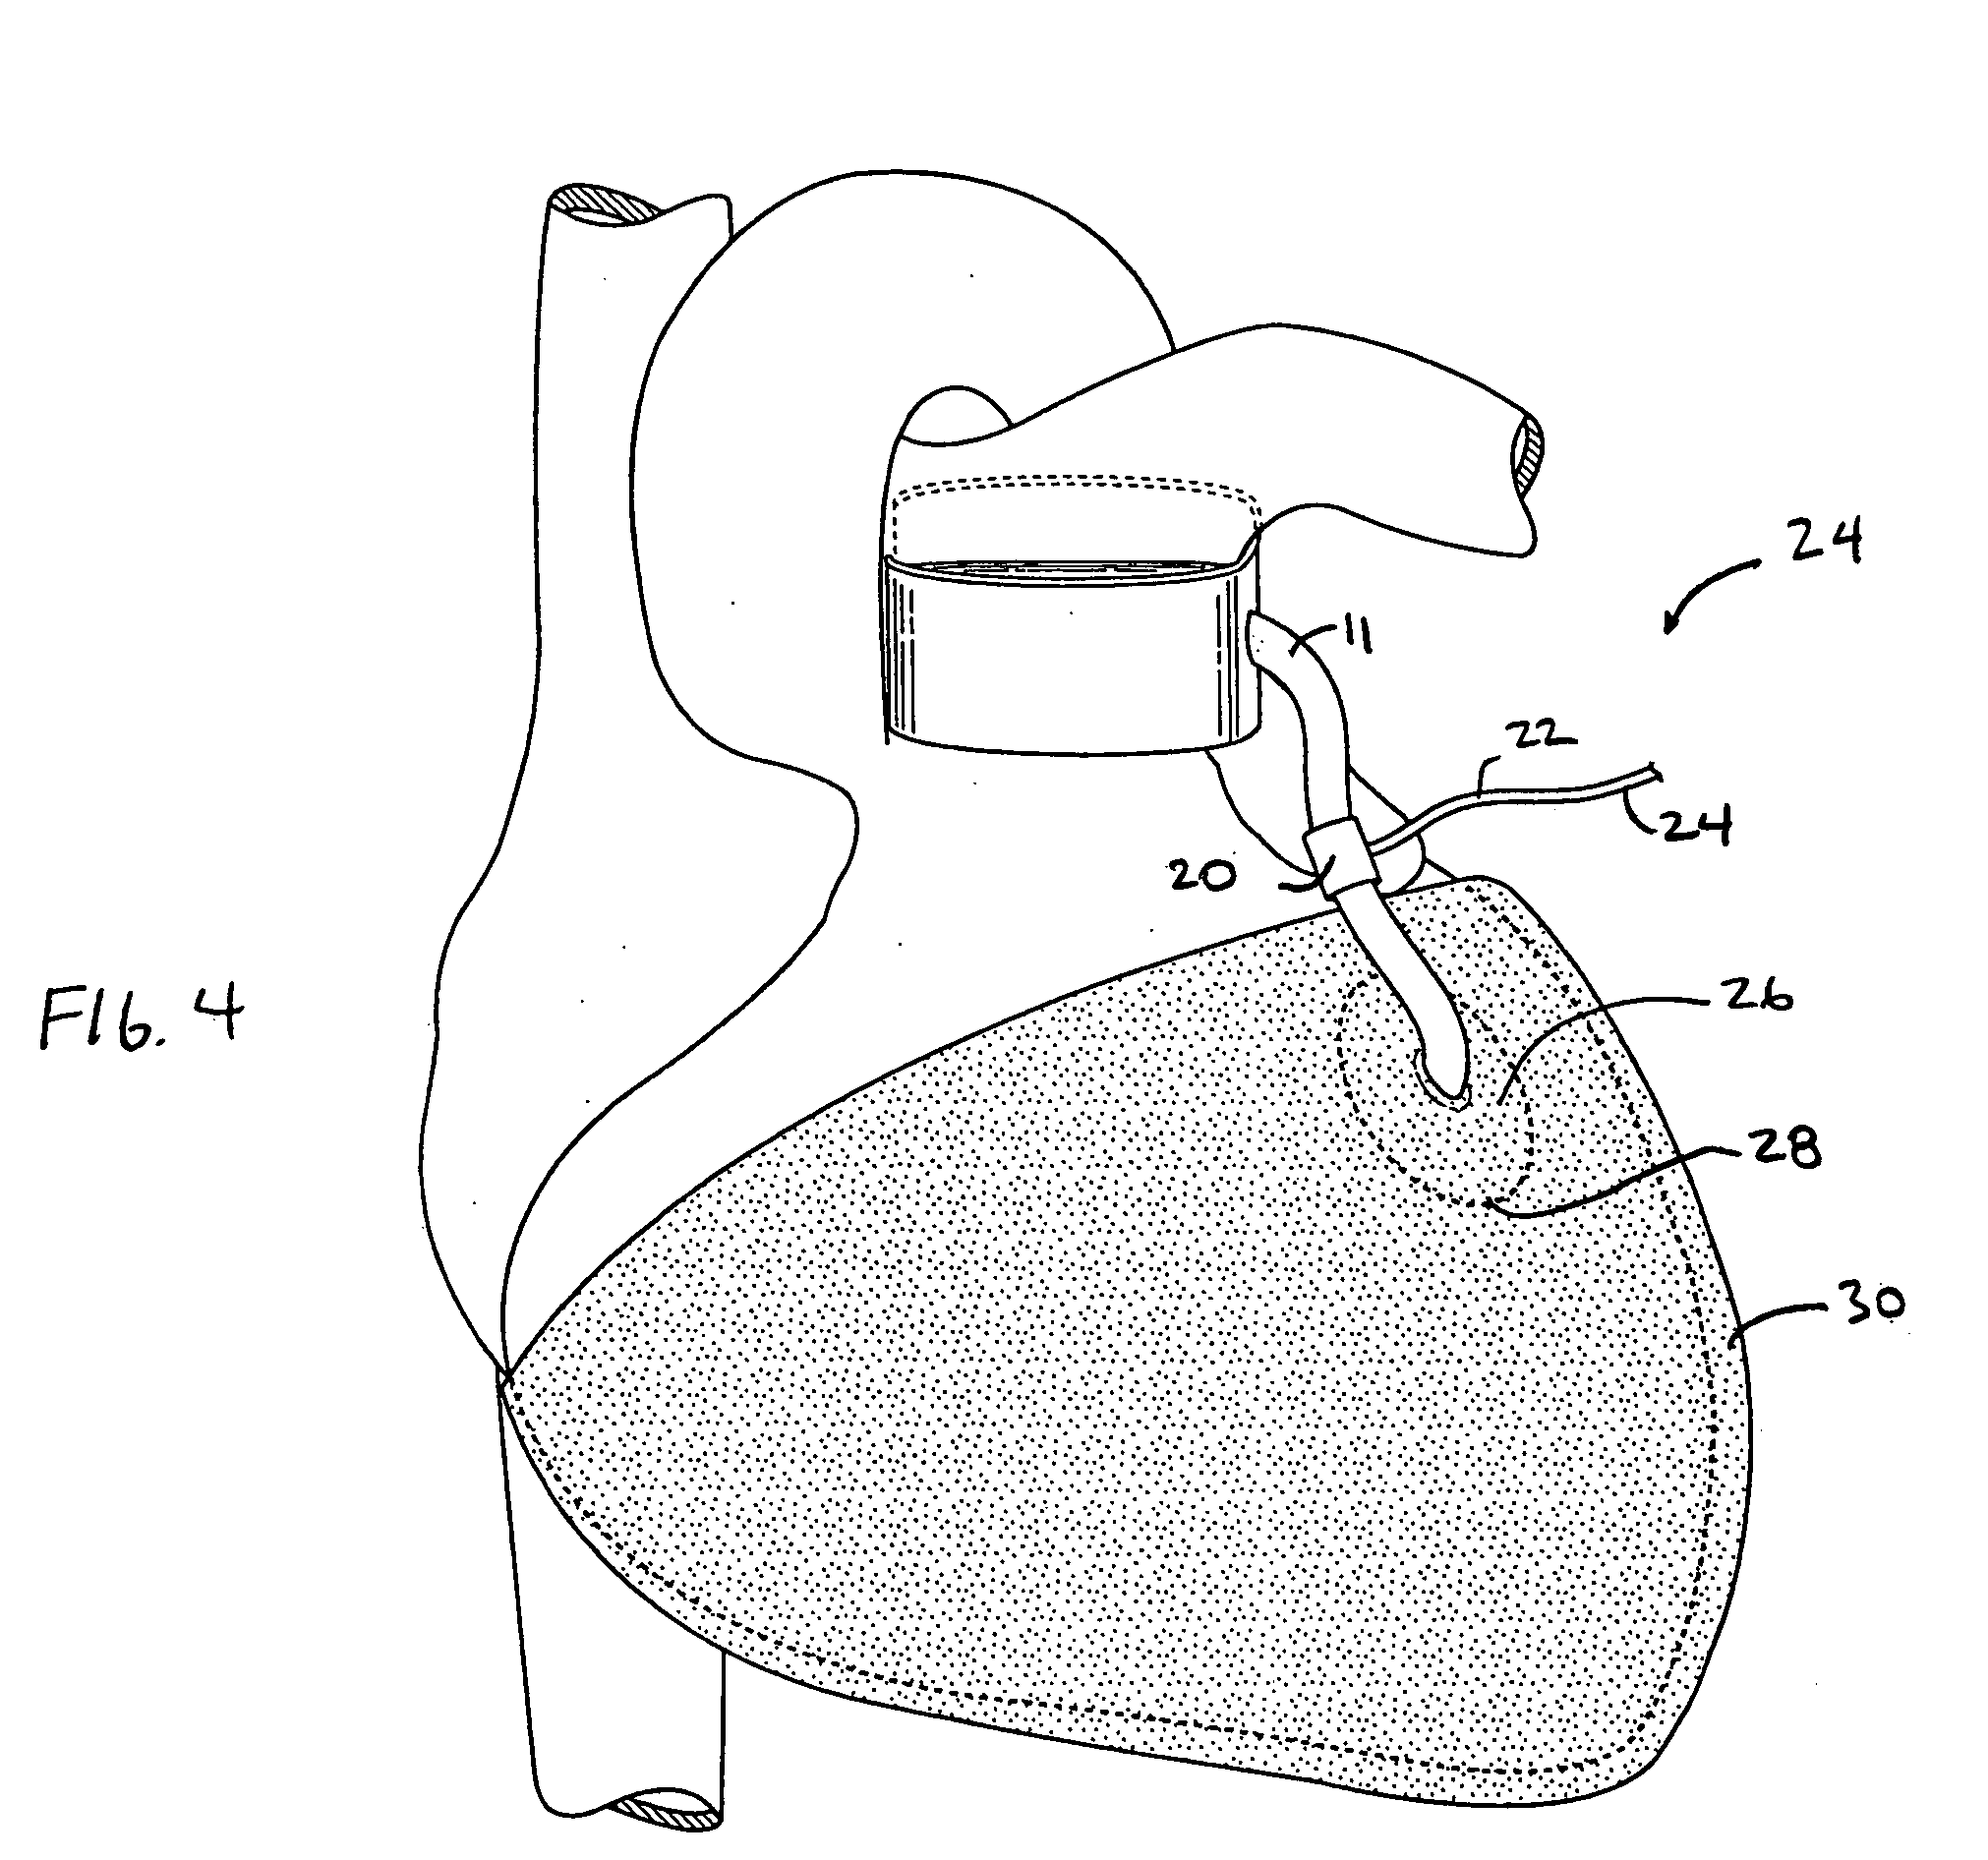 Devices and methods for absorbing, transferring, and delivering heart energy